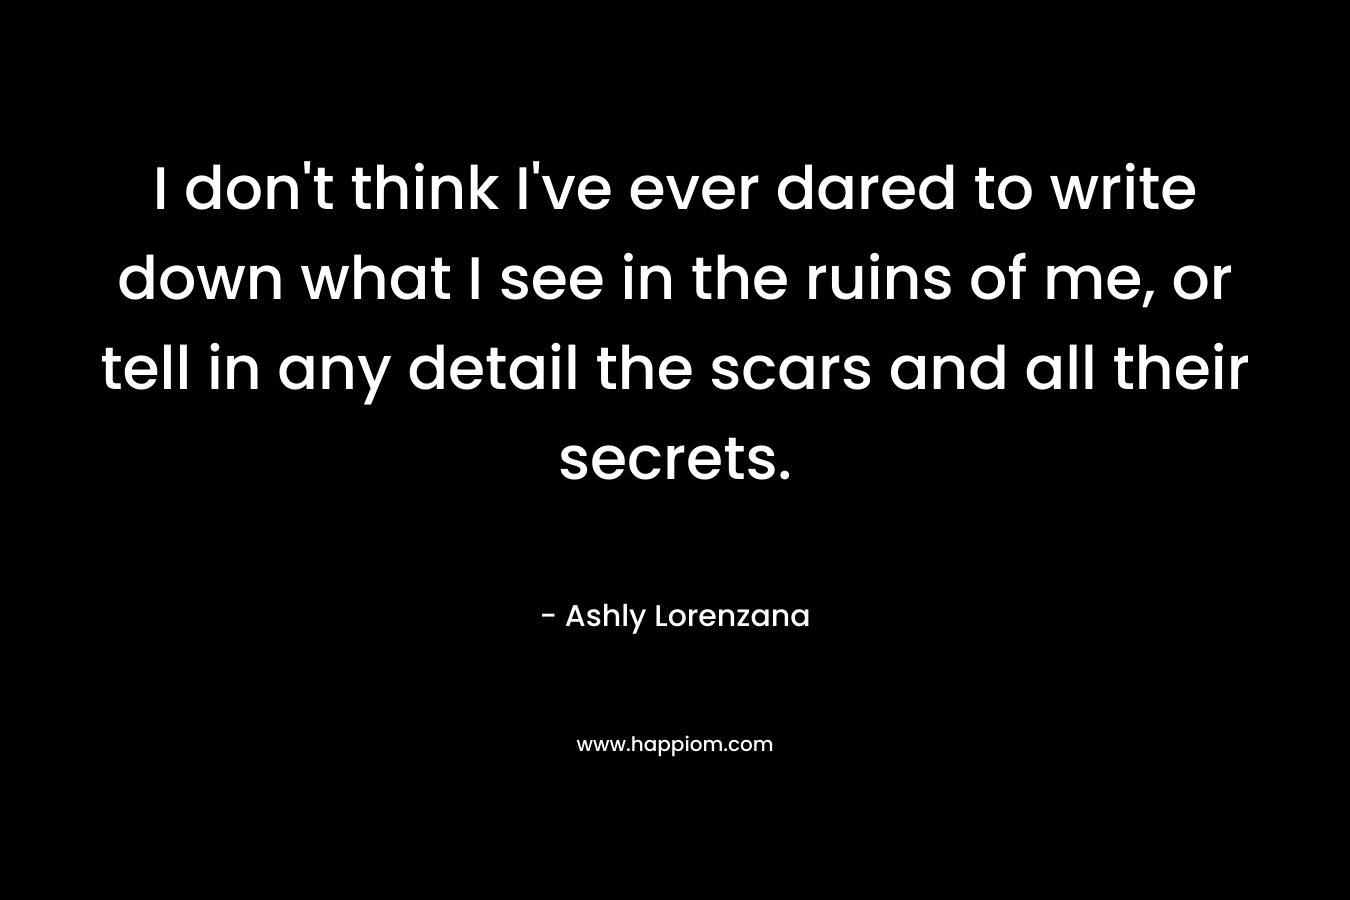 I don’t think I’ve ever dared to write down what I see in the ruins of me, or tell in any detail the scars and all their secrets. – Ashly Lorenzana